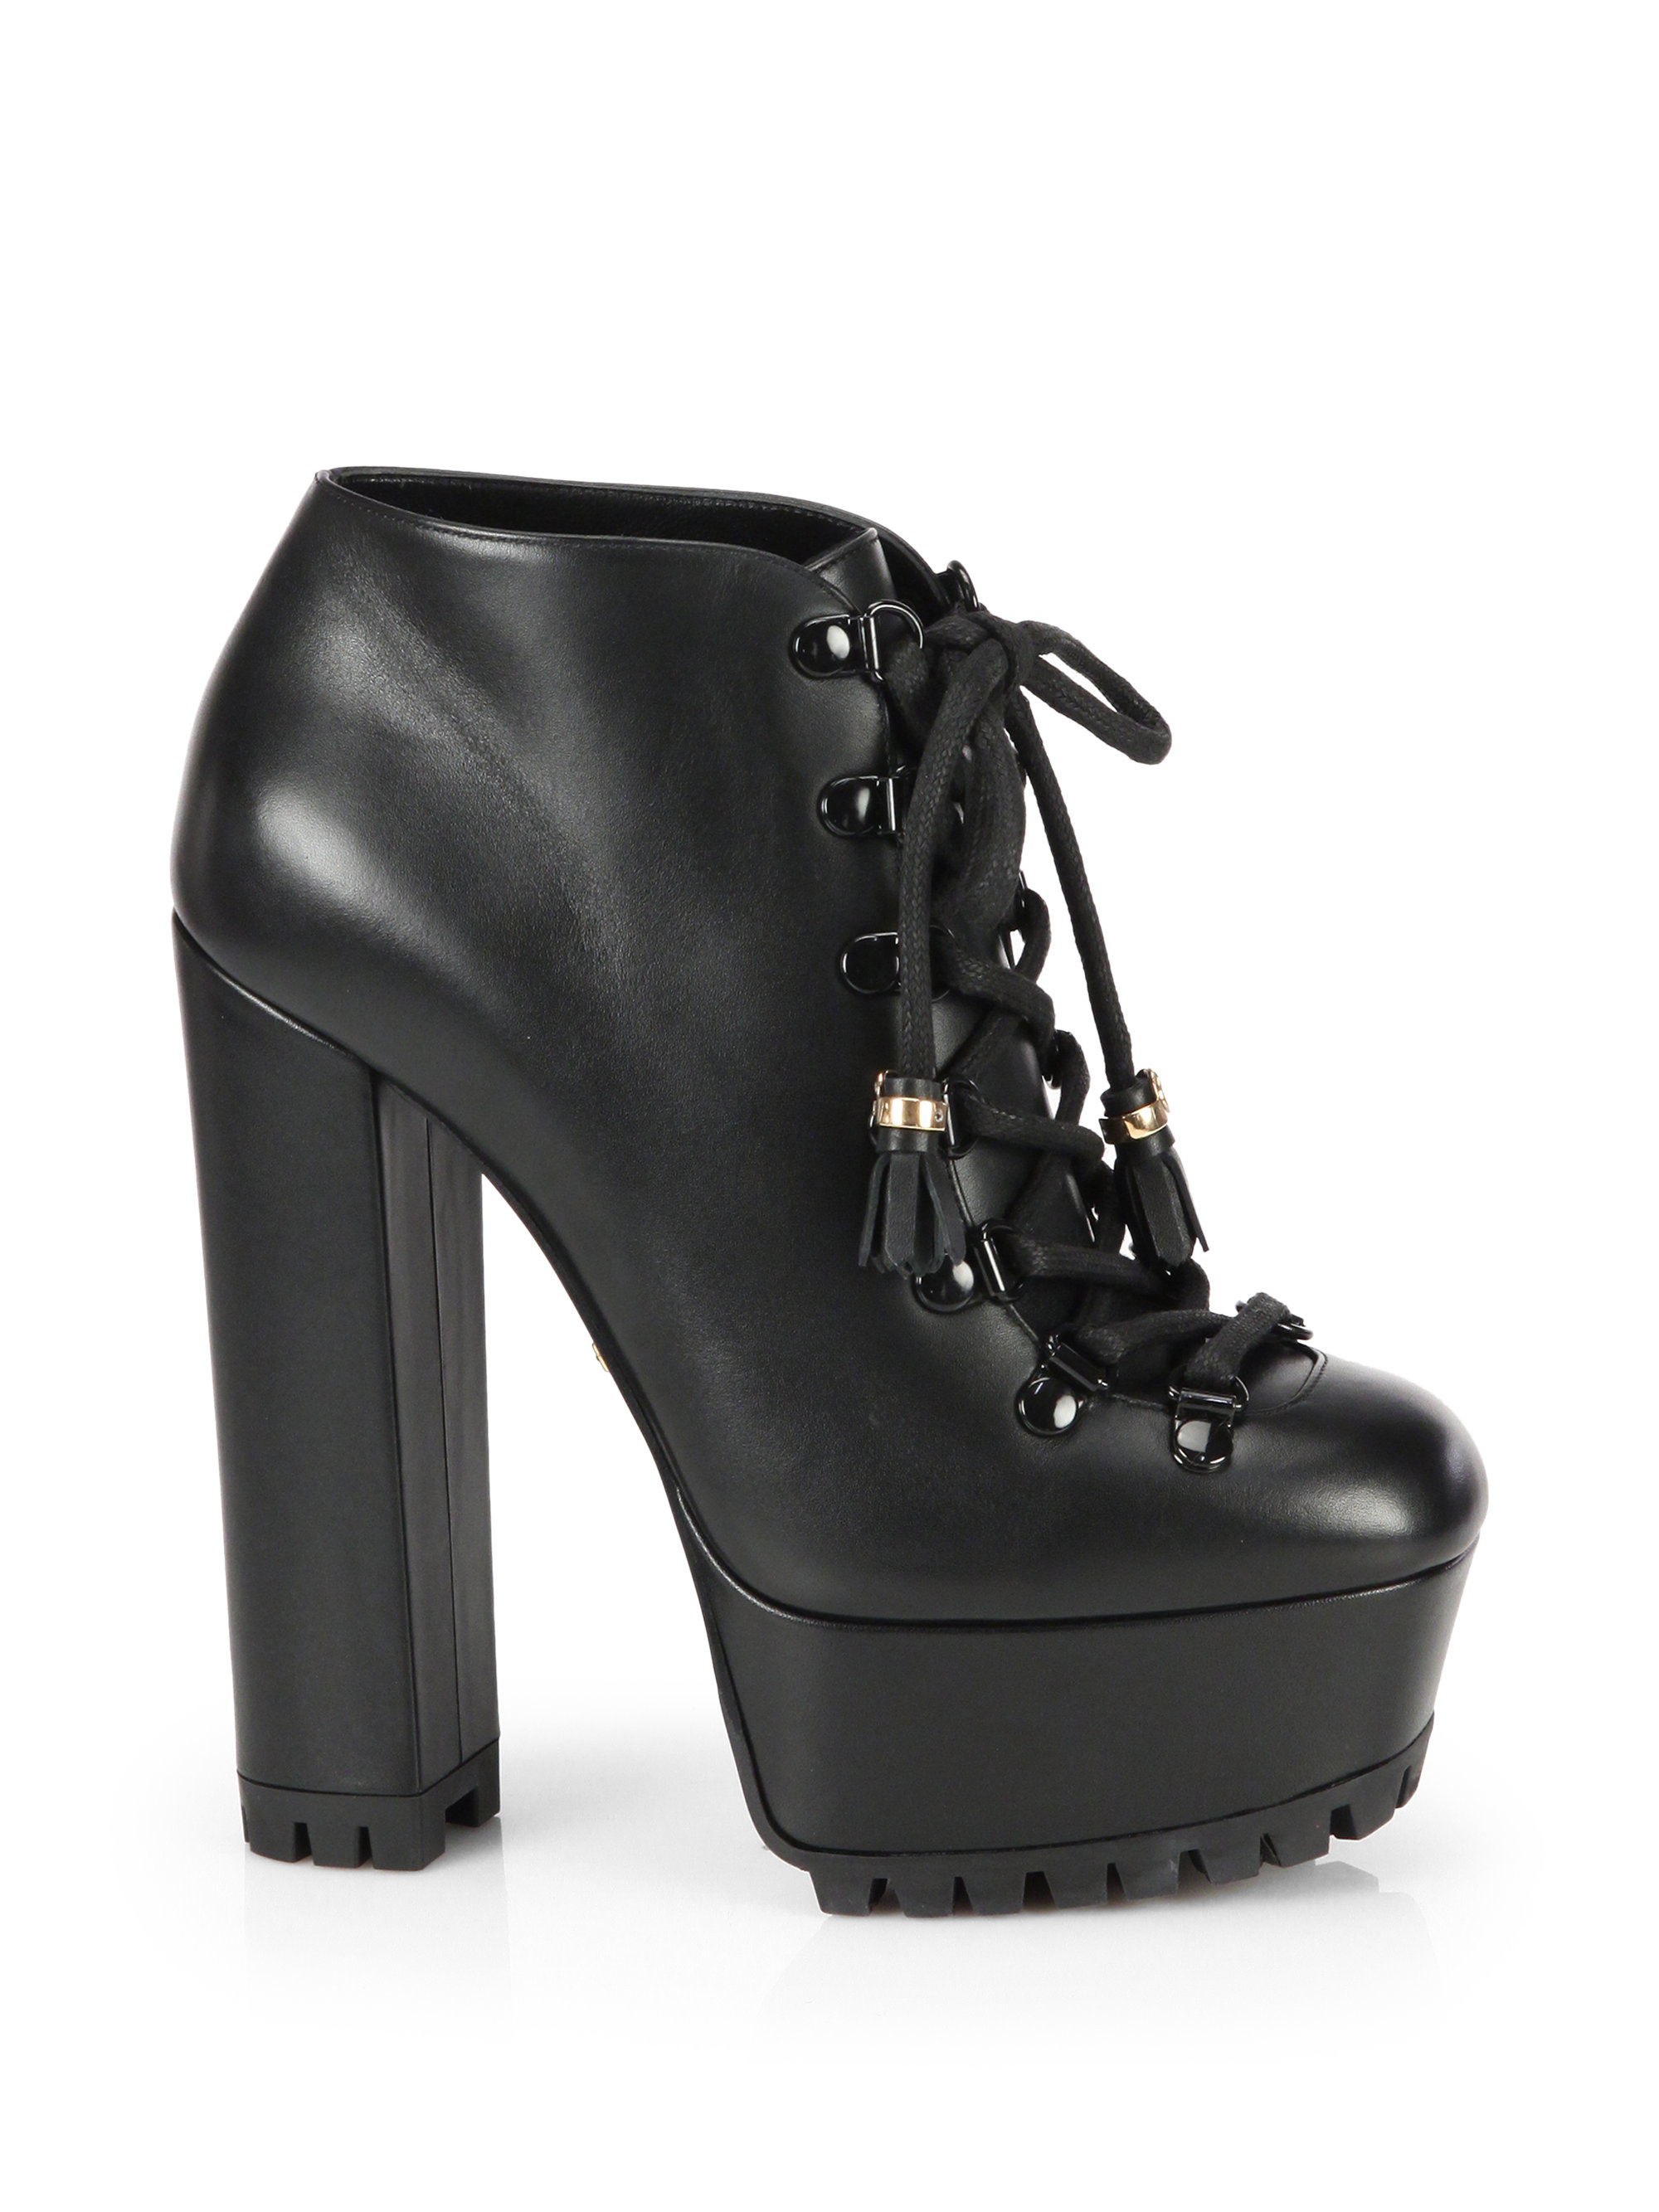 Gucci Kayla Lace-Up Leather Platform Ankle Boots in Black | Lyst